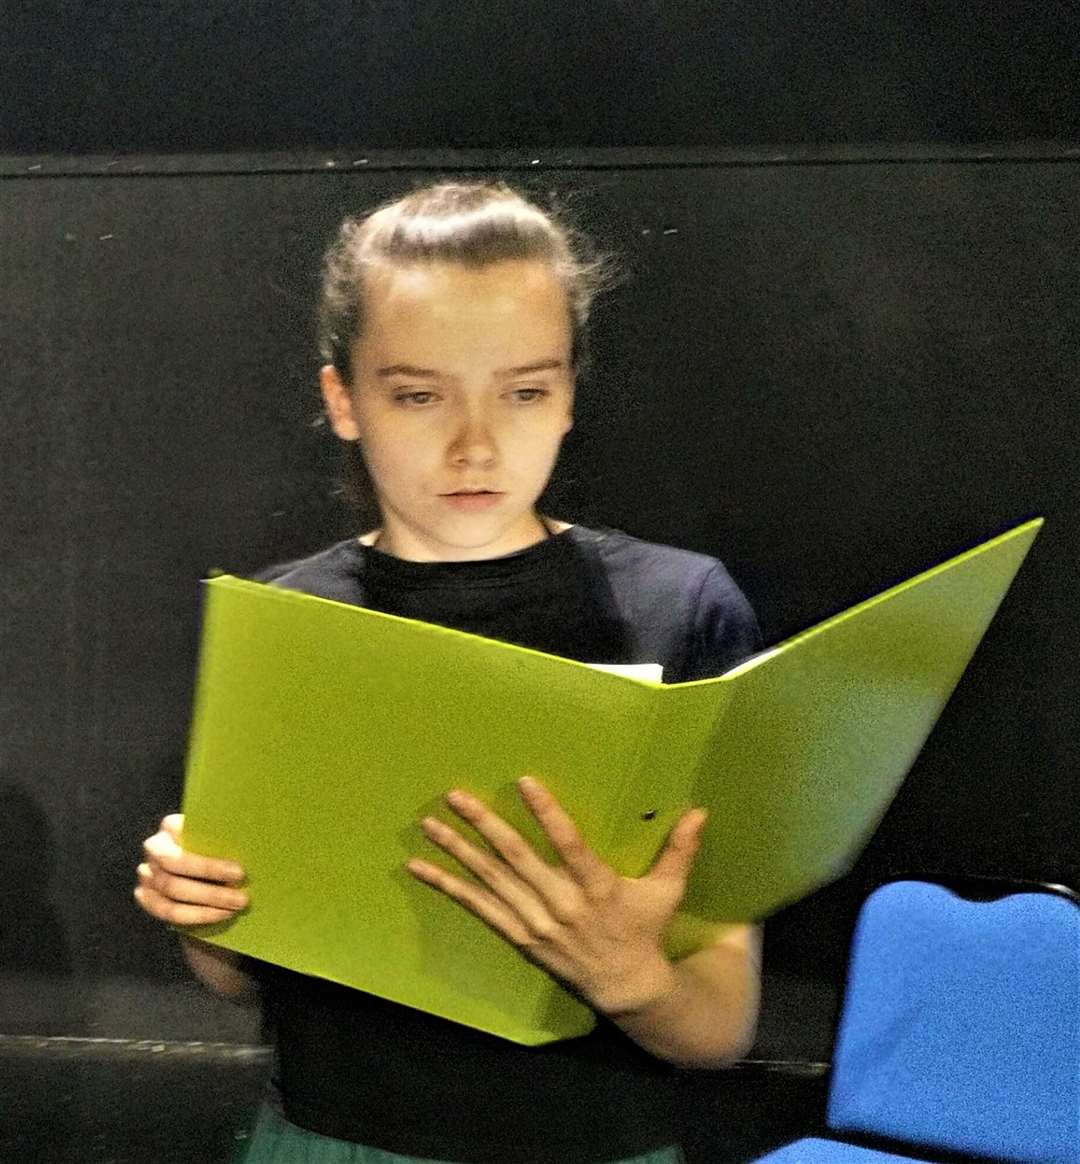 Anja Cilia at the read-through of All Clear which will be performed at The Avenue Theatre, Sittingbourne